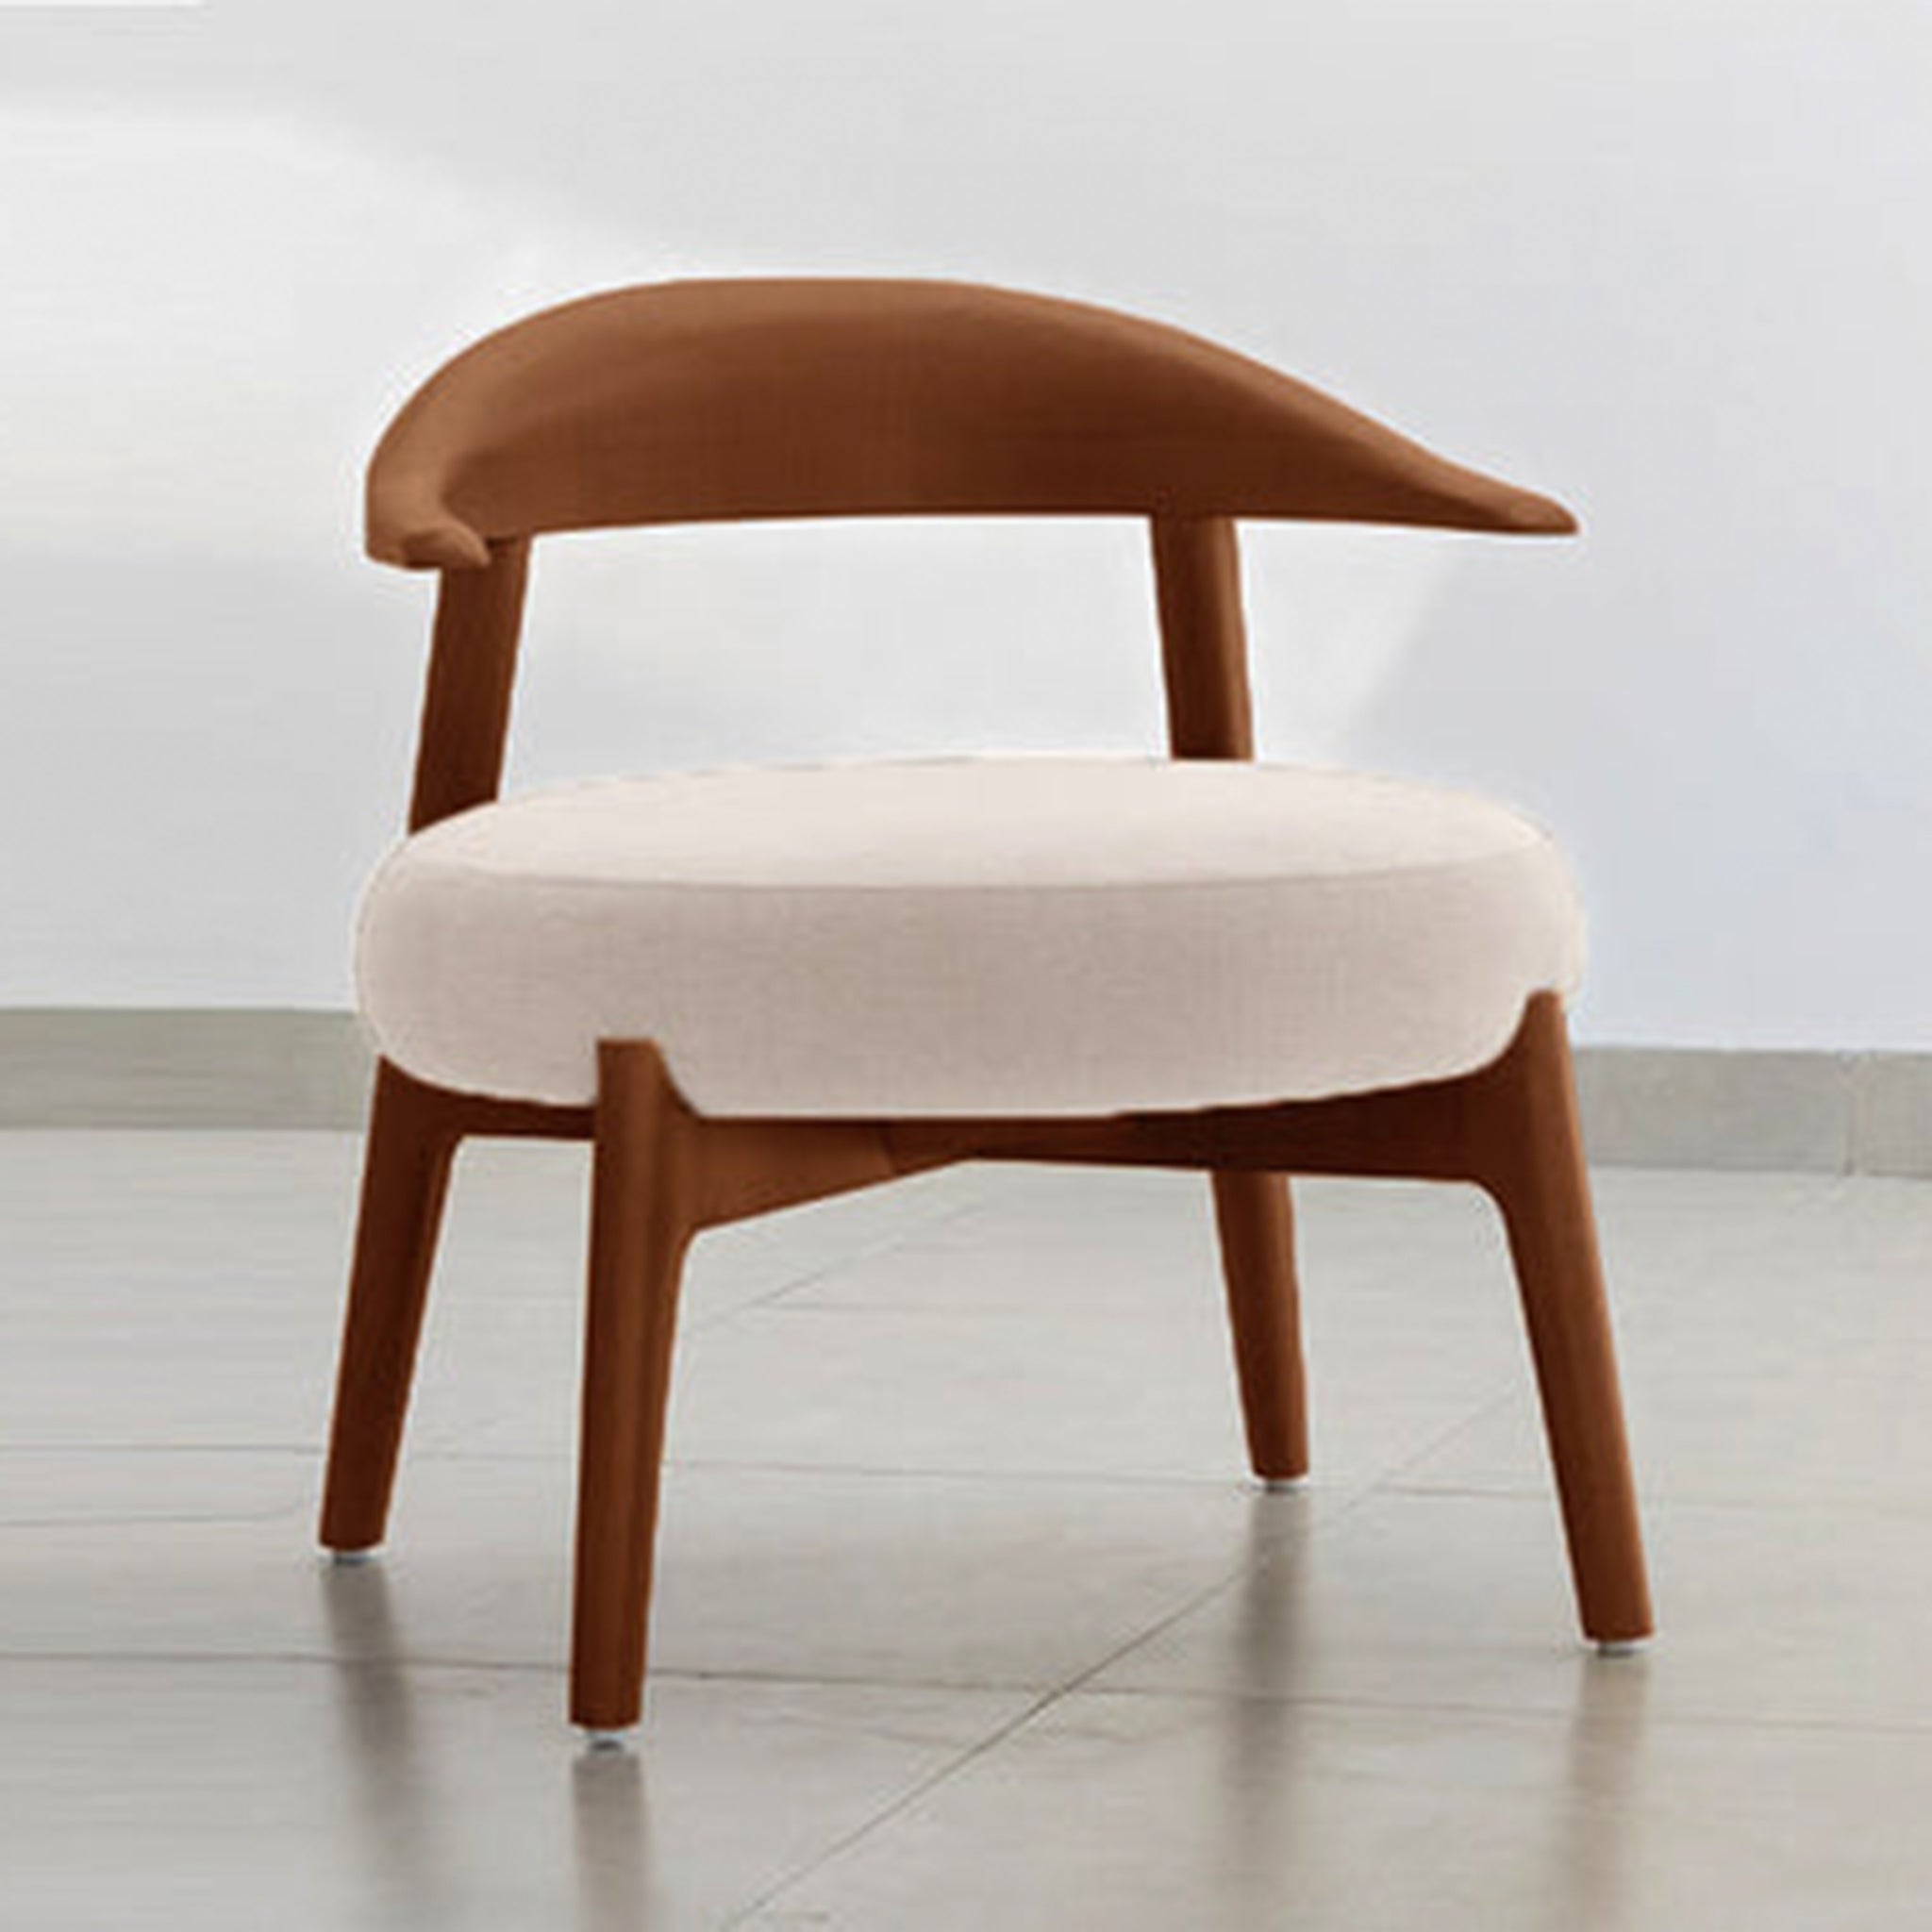 "Contemporary Hyde Accent Chair with a cozy fabric seat"